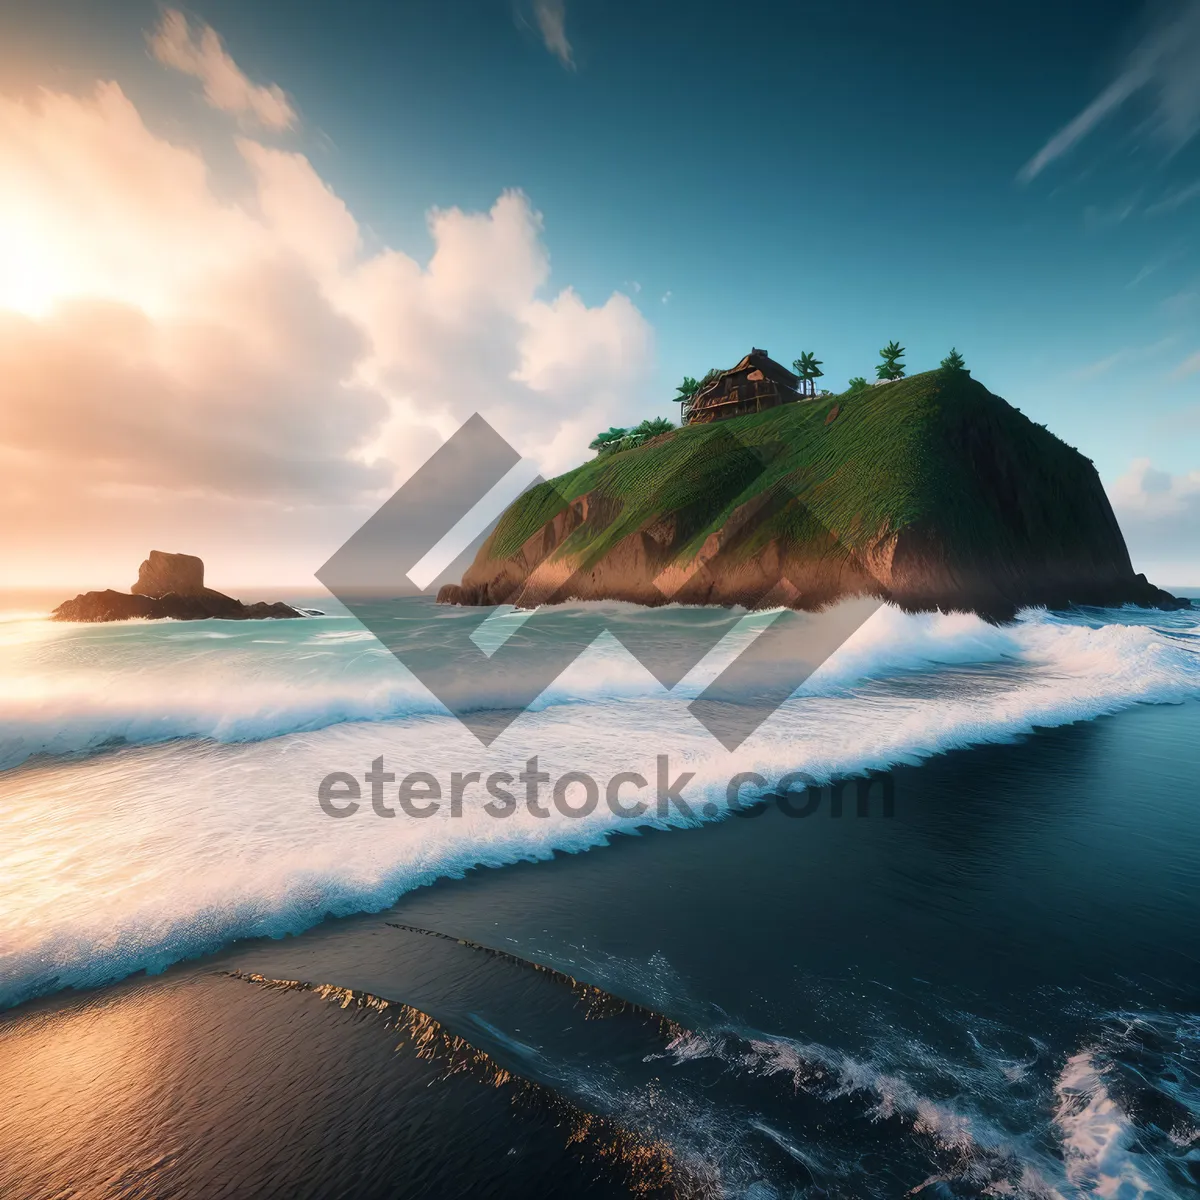 Picture of Sun-kissed paradise: Serene beach coastline with tropical waves